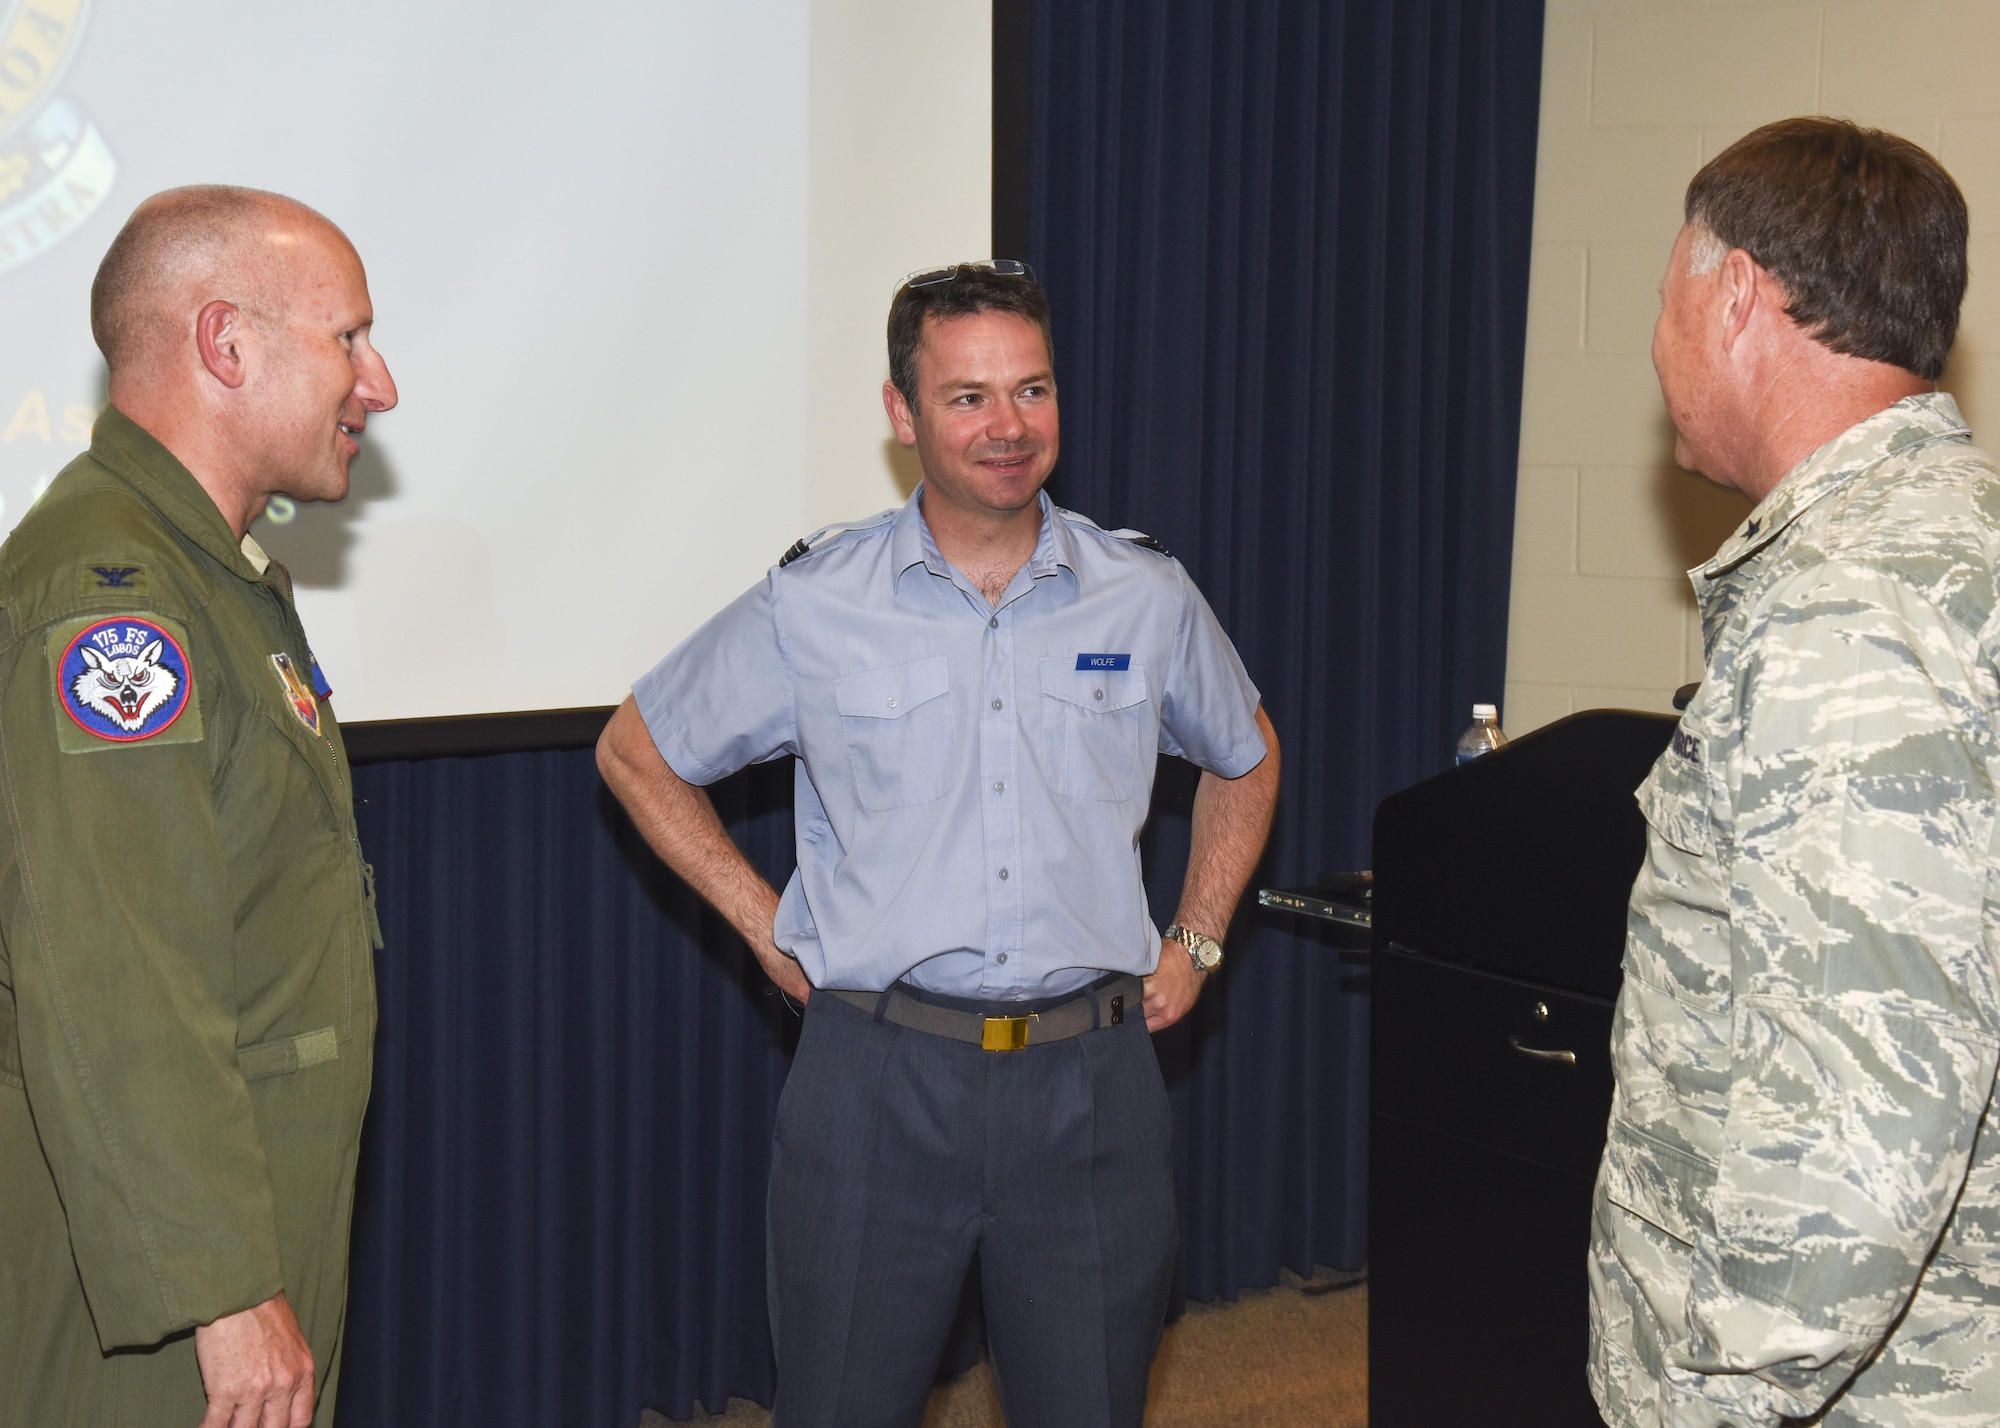 Flt. Lt. Andrew Wolfe, 607 Squadron (County of Durham) logistic officer, talks with Brig. Gen. Russ Walz, South Dakota National Guard director of joint staff, and Col. Gregory Lair, 114th Fighter Wing vice-commander, during his visit as part of the Military Reserve Exchange Program. MREP is a reciprocal exchange program which provides Guard and Reserve members, both officer and enlisted, the opportunity to train with select foreign allied nations and gain a better understanding how foreign powers operate. (U.S. Air National Guard photo by Tech. Sgt. Luke Olson/Released)